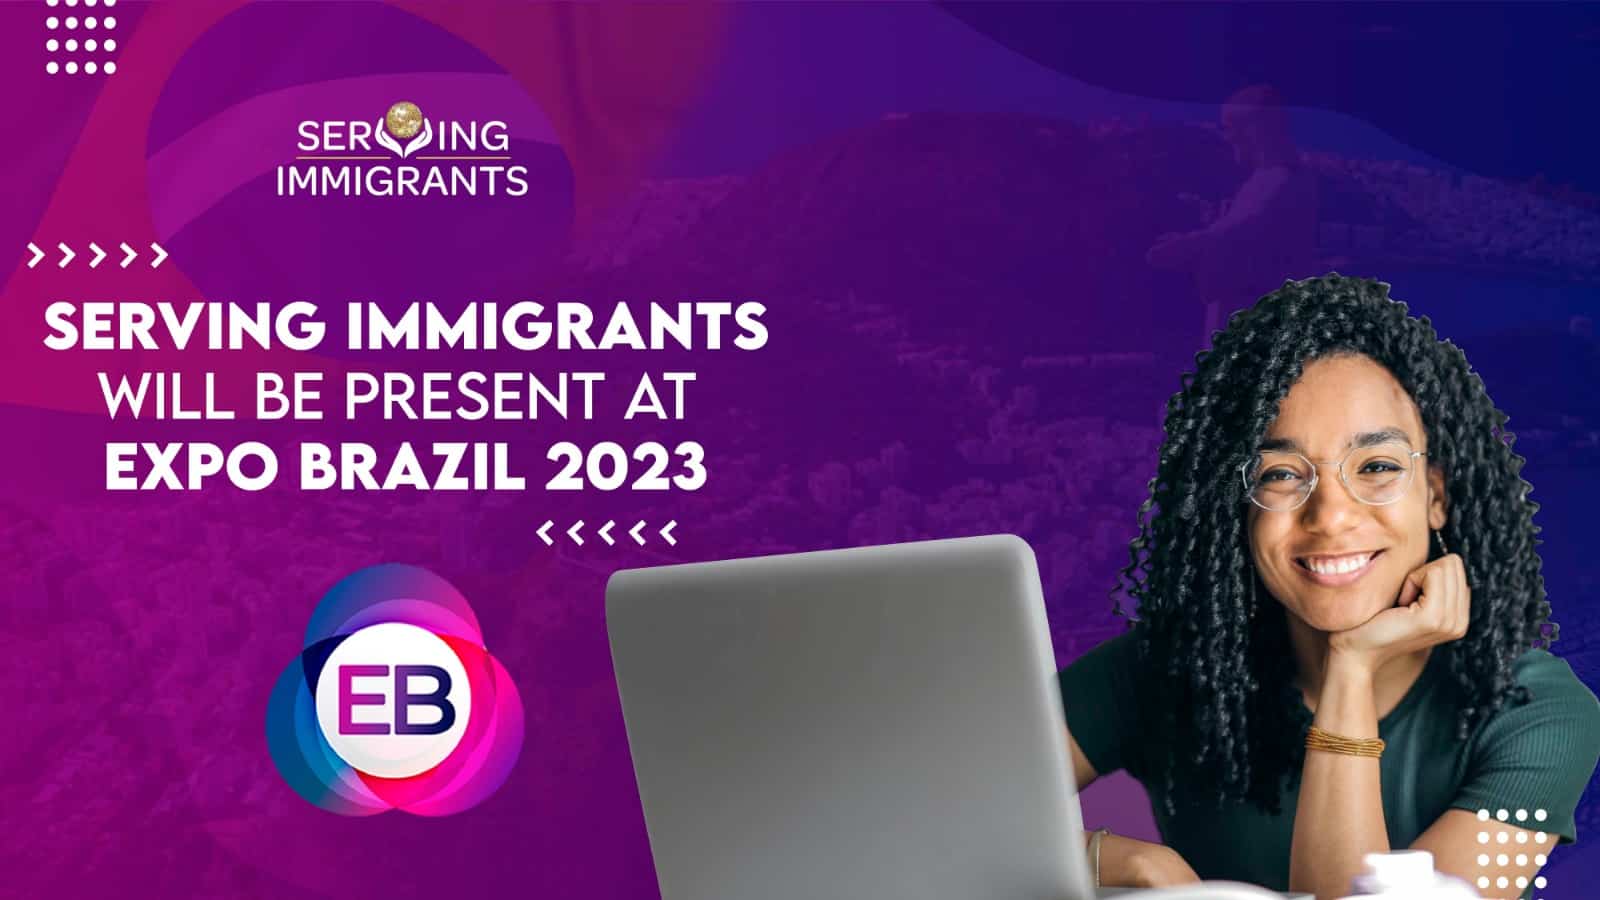 Serving Immigrants will be present at Expo Brazil 2023